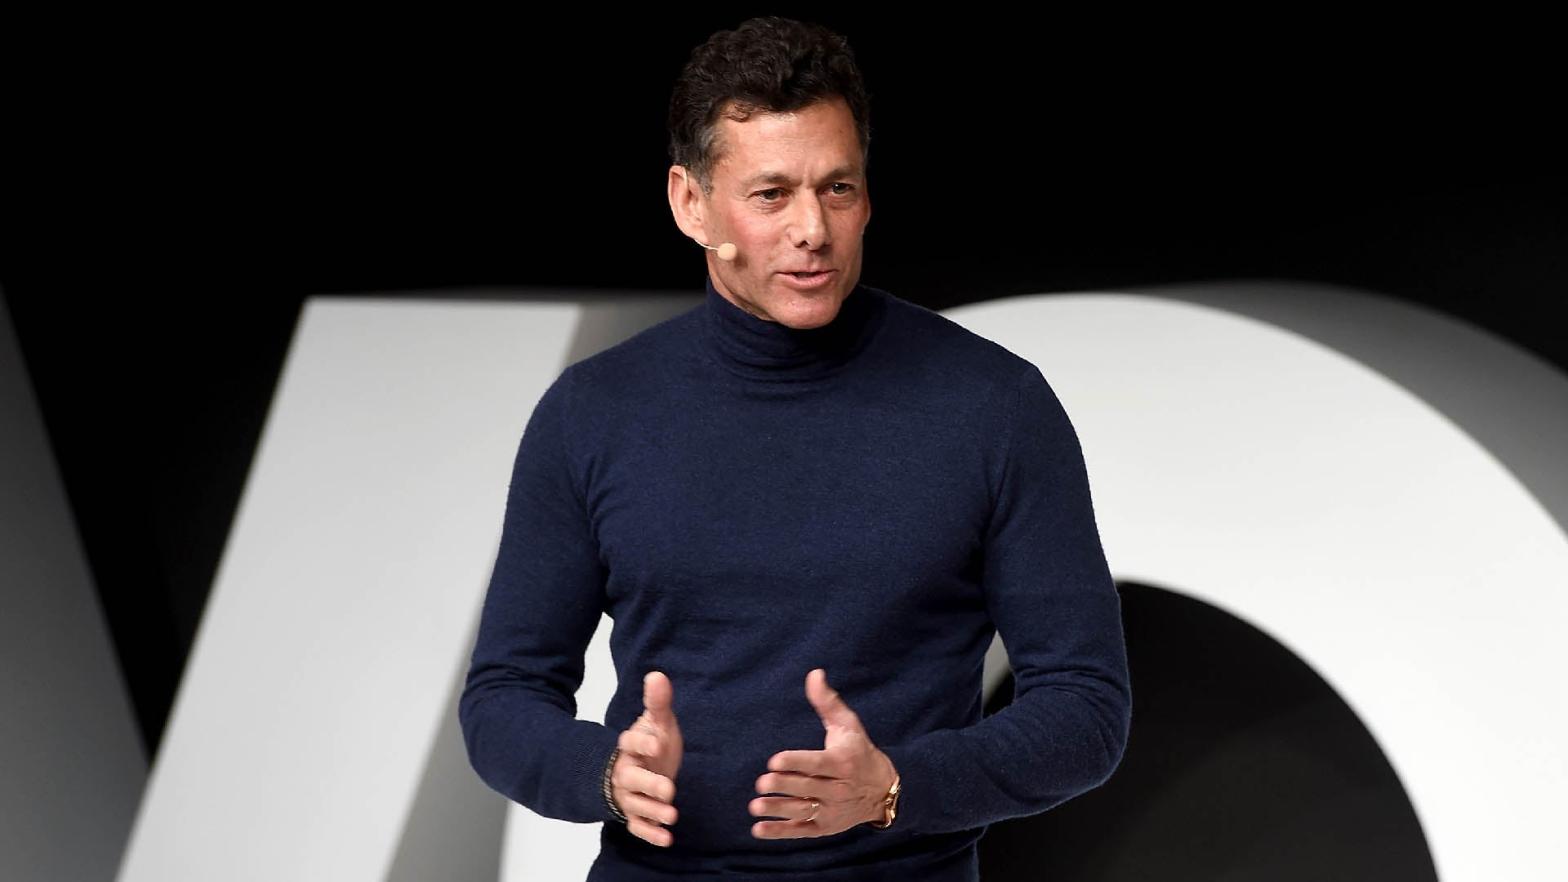 Take-Two CEO Strauss Zelnick seen here wearing a luxe cashmere turtleneck in 2017. (Photo: Stuart C. Wilson, Getty Images)